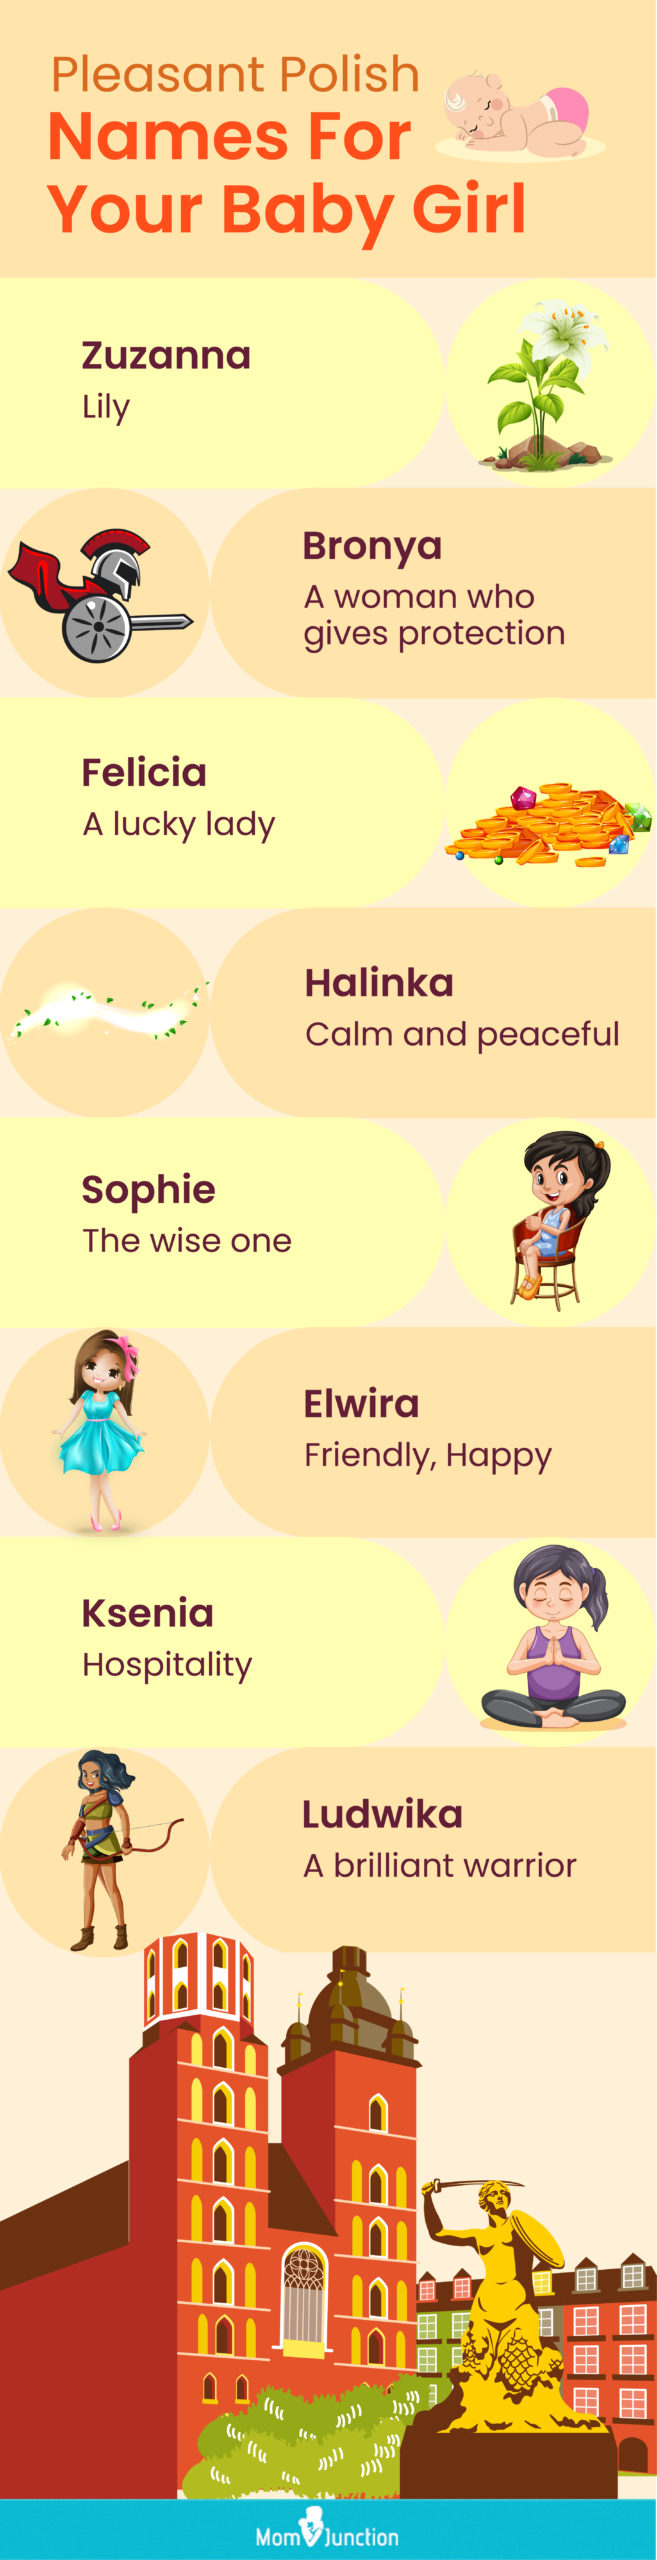 pleasant polish names for your baby girl (infographic)